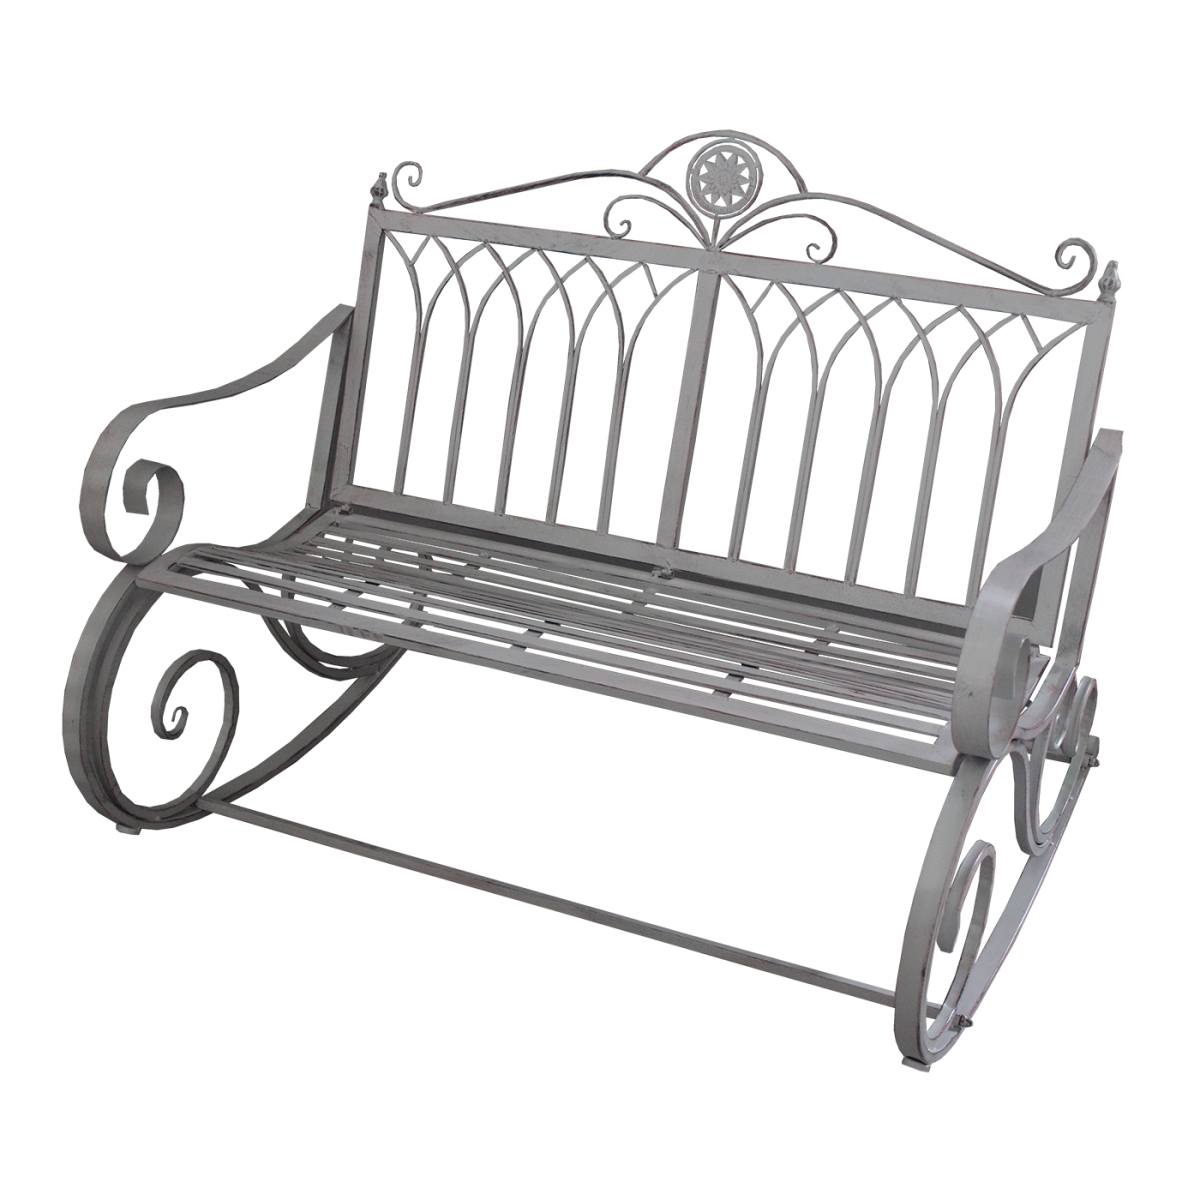 Oakland Living 17346-r-bench-ag Iron & Steel Ornate Traditional Outdoor Patio Porch Garden Rocking Bench Loveseat, Antique Grey